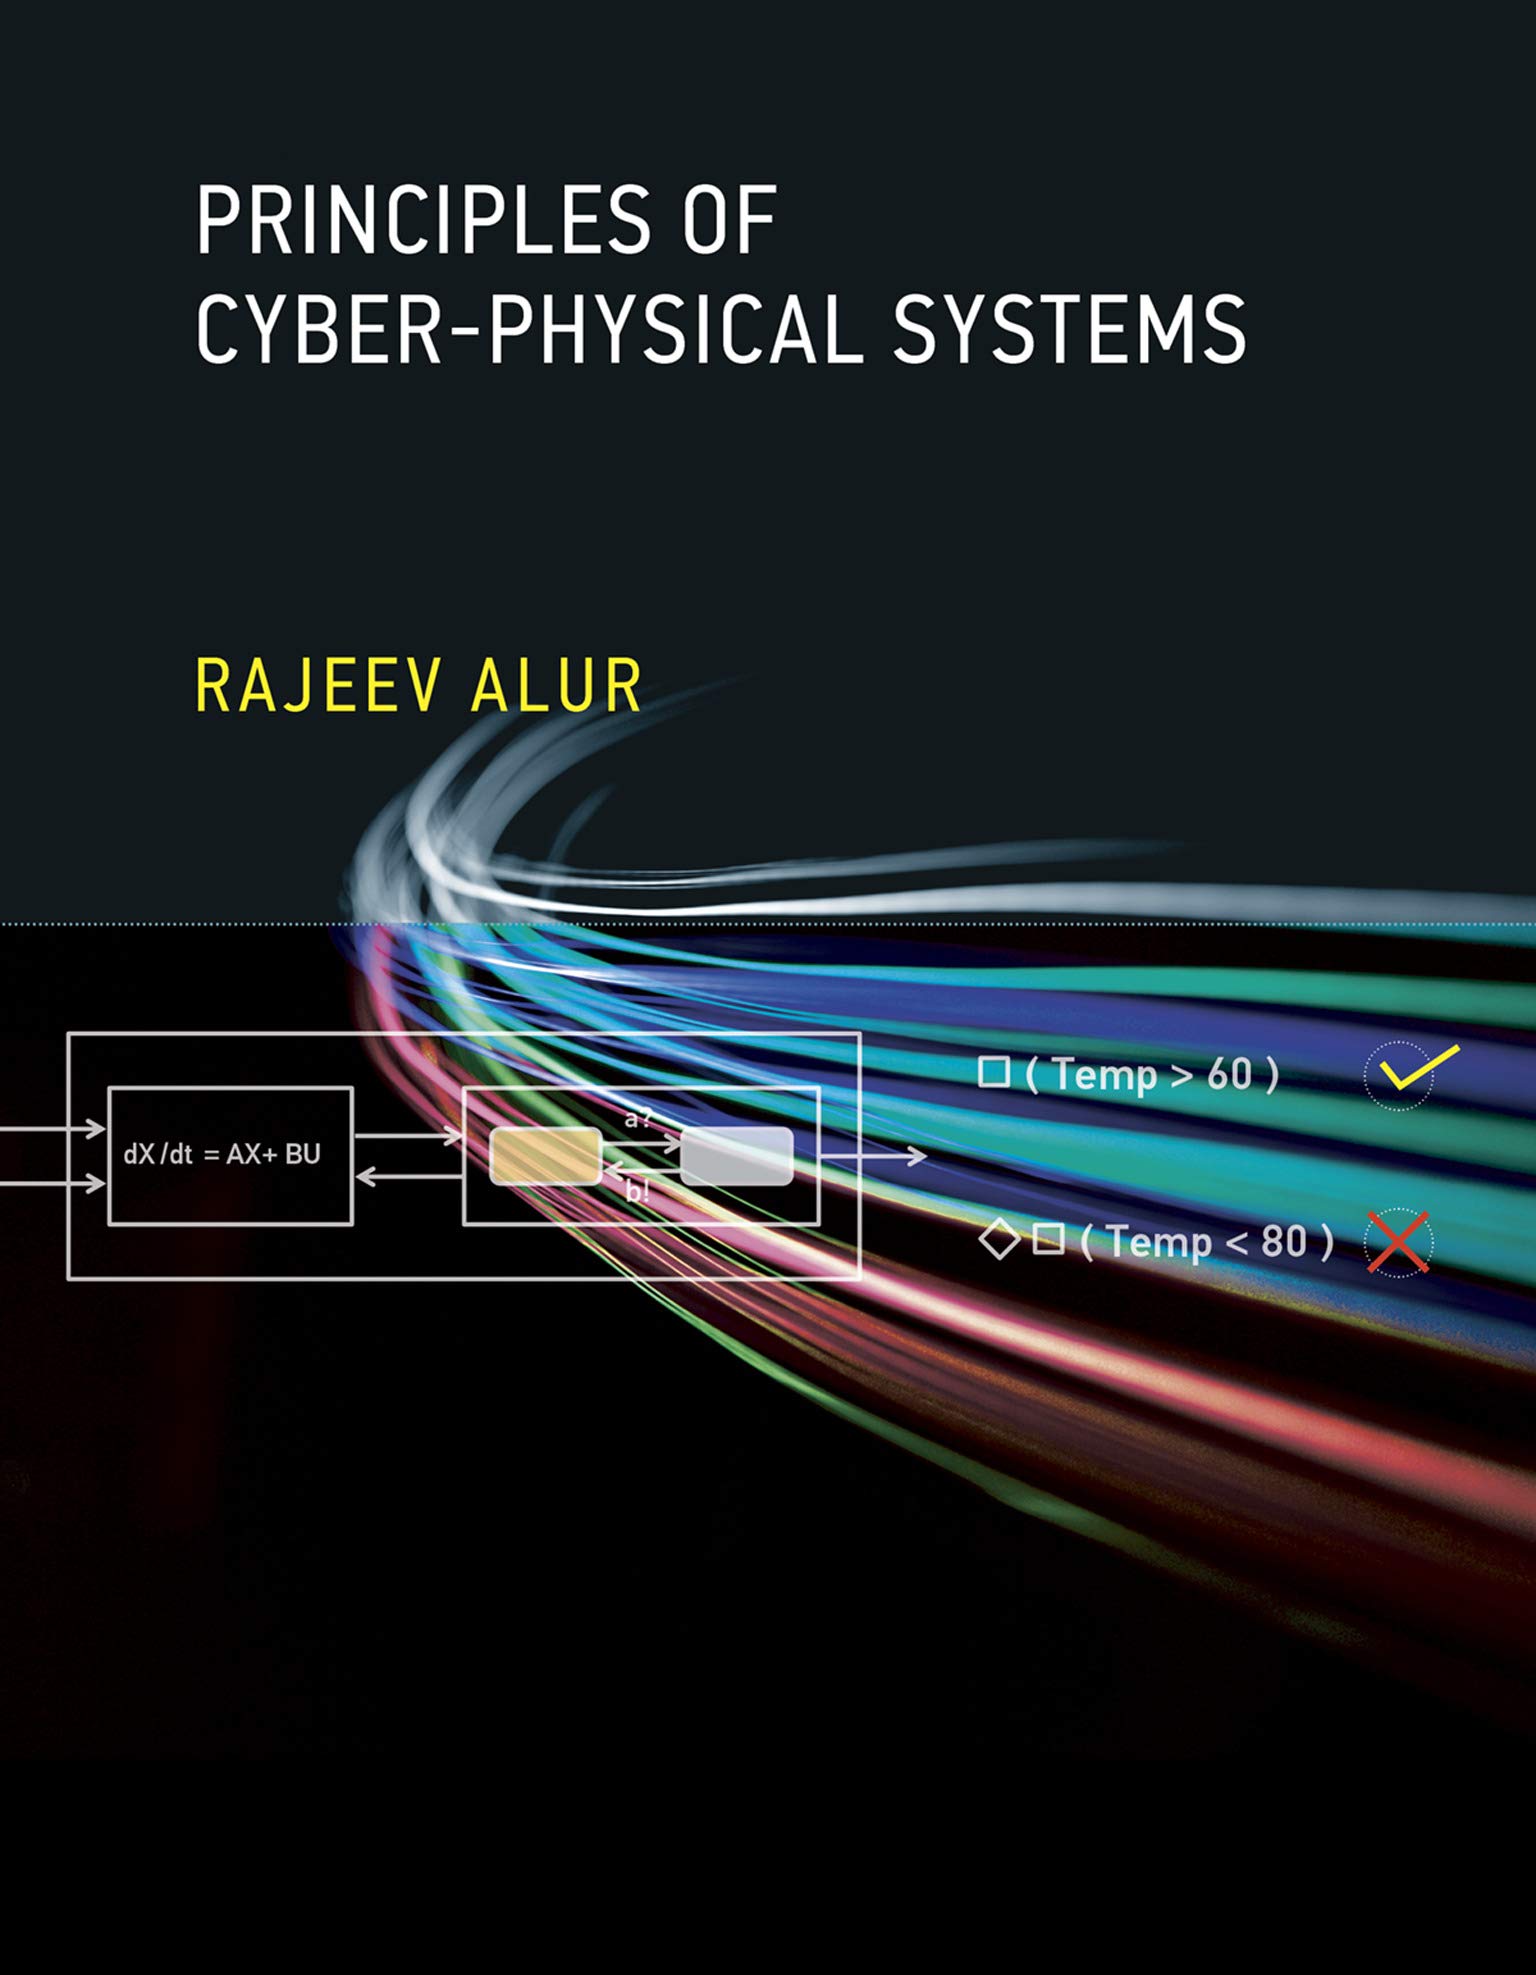 Alur-Principles-Cyber-Physical-Systems-2015